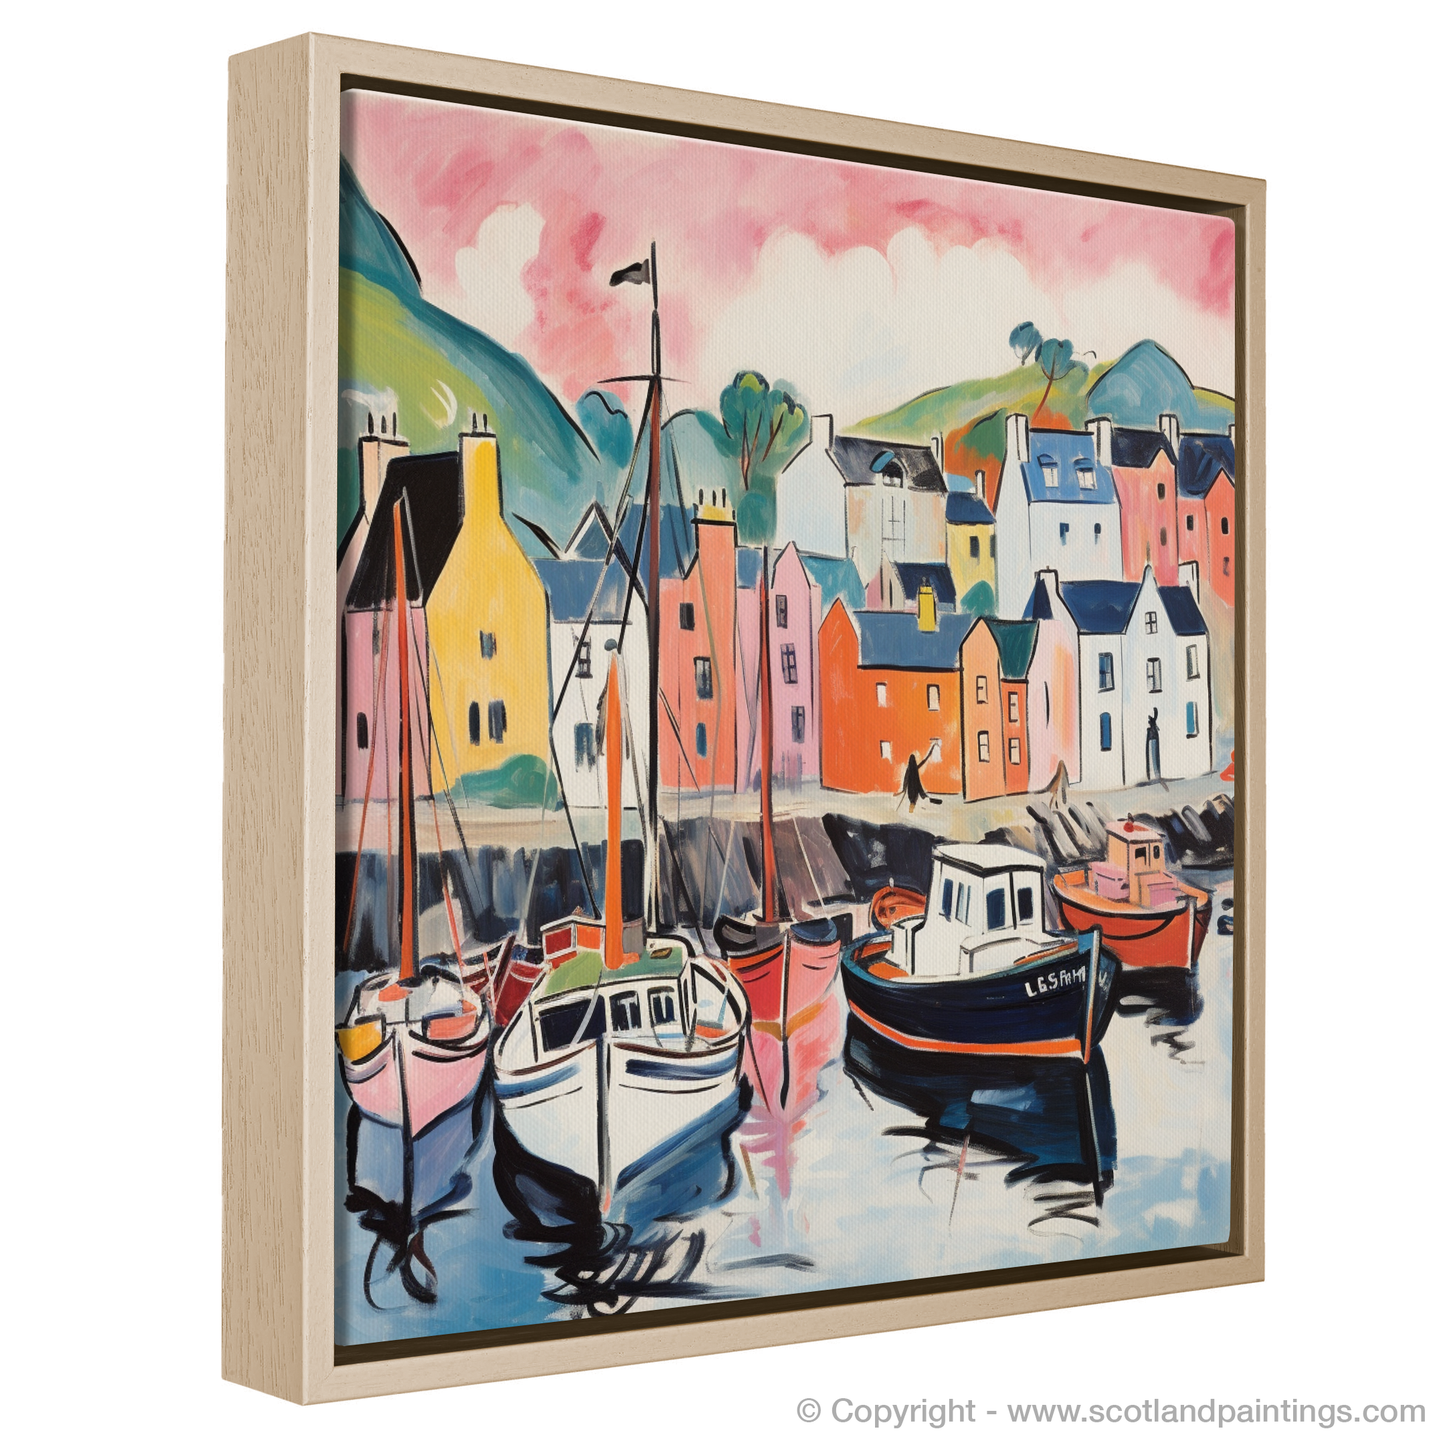 Vibrant Portree Harbour: A Fauvist Ode to Isle of Skye's Charm